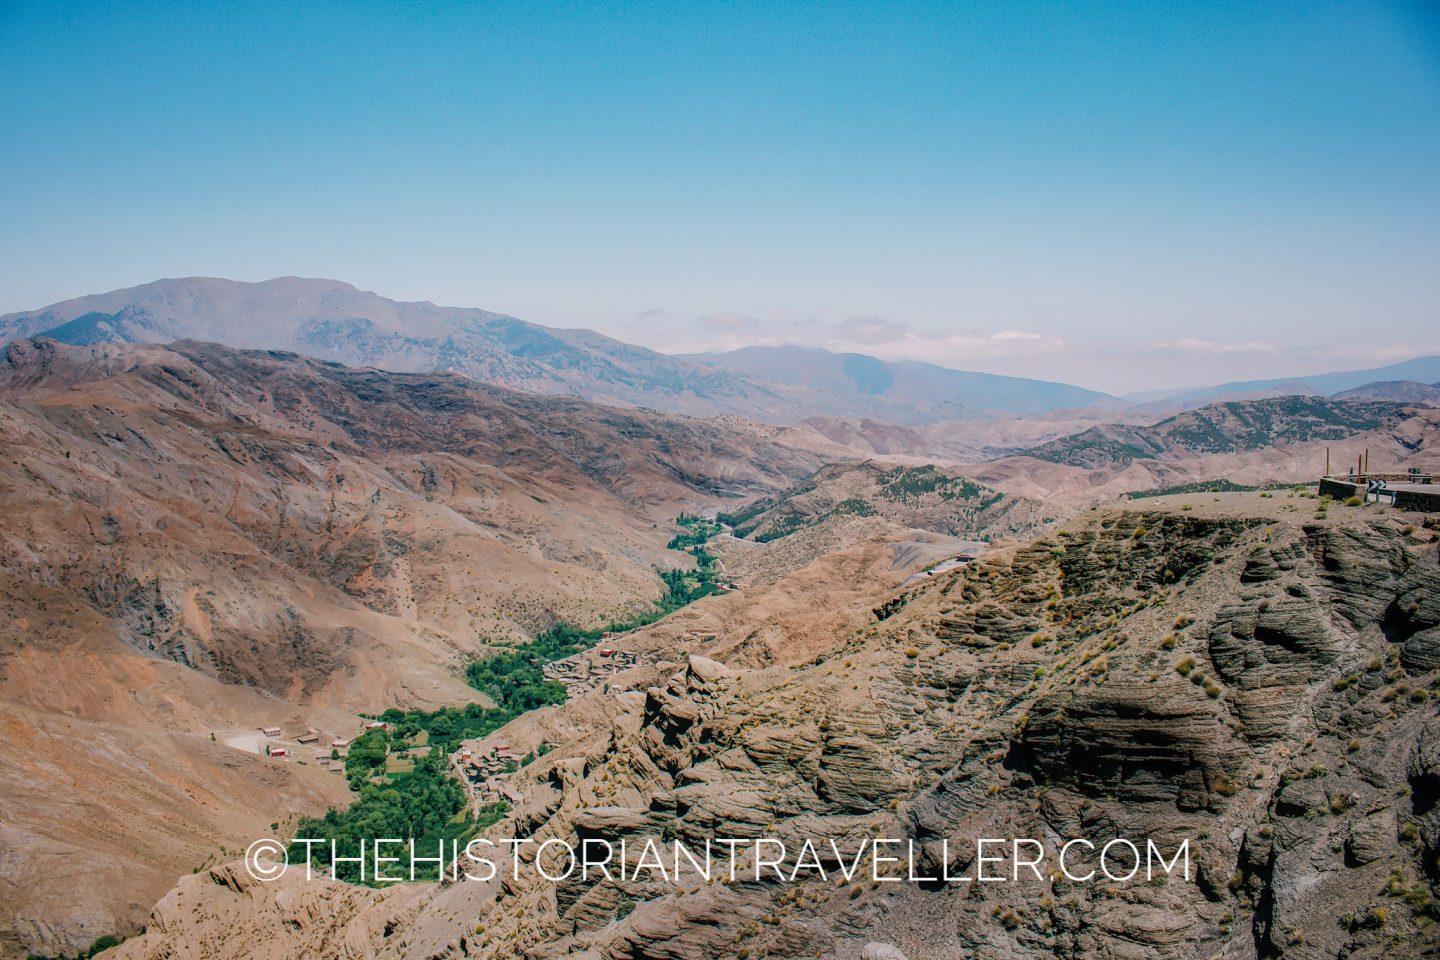 Road of Thousand Kasbahs itinerary -  Driving the High Atlas Mountains, view from the car and oasis in the valley